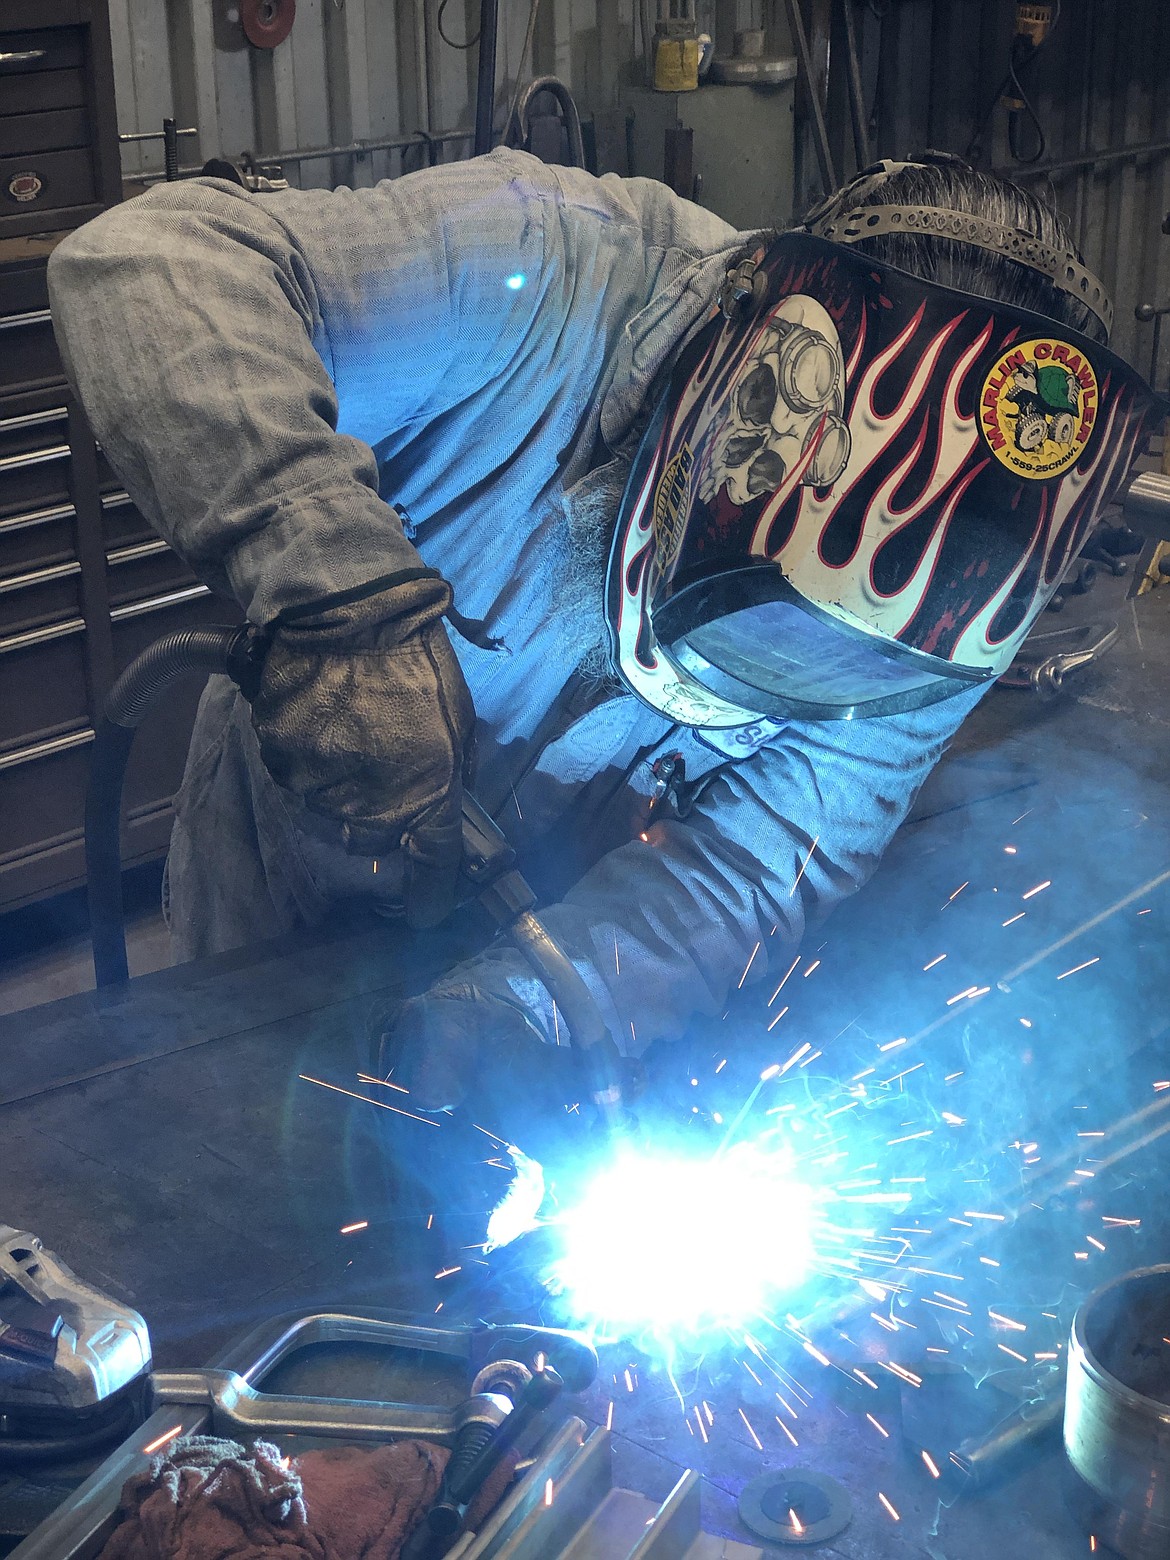 Steve Escoabr, a machinist at Pasco Machine, welds together a special roller designed to clear off conveyor belts.